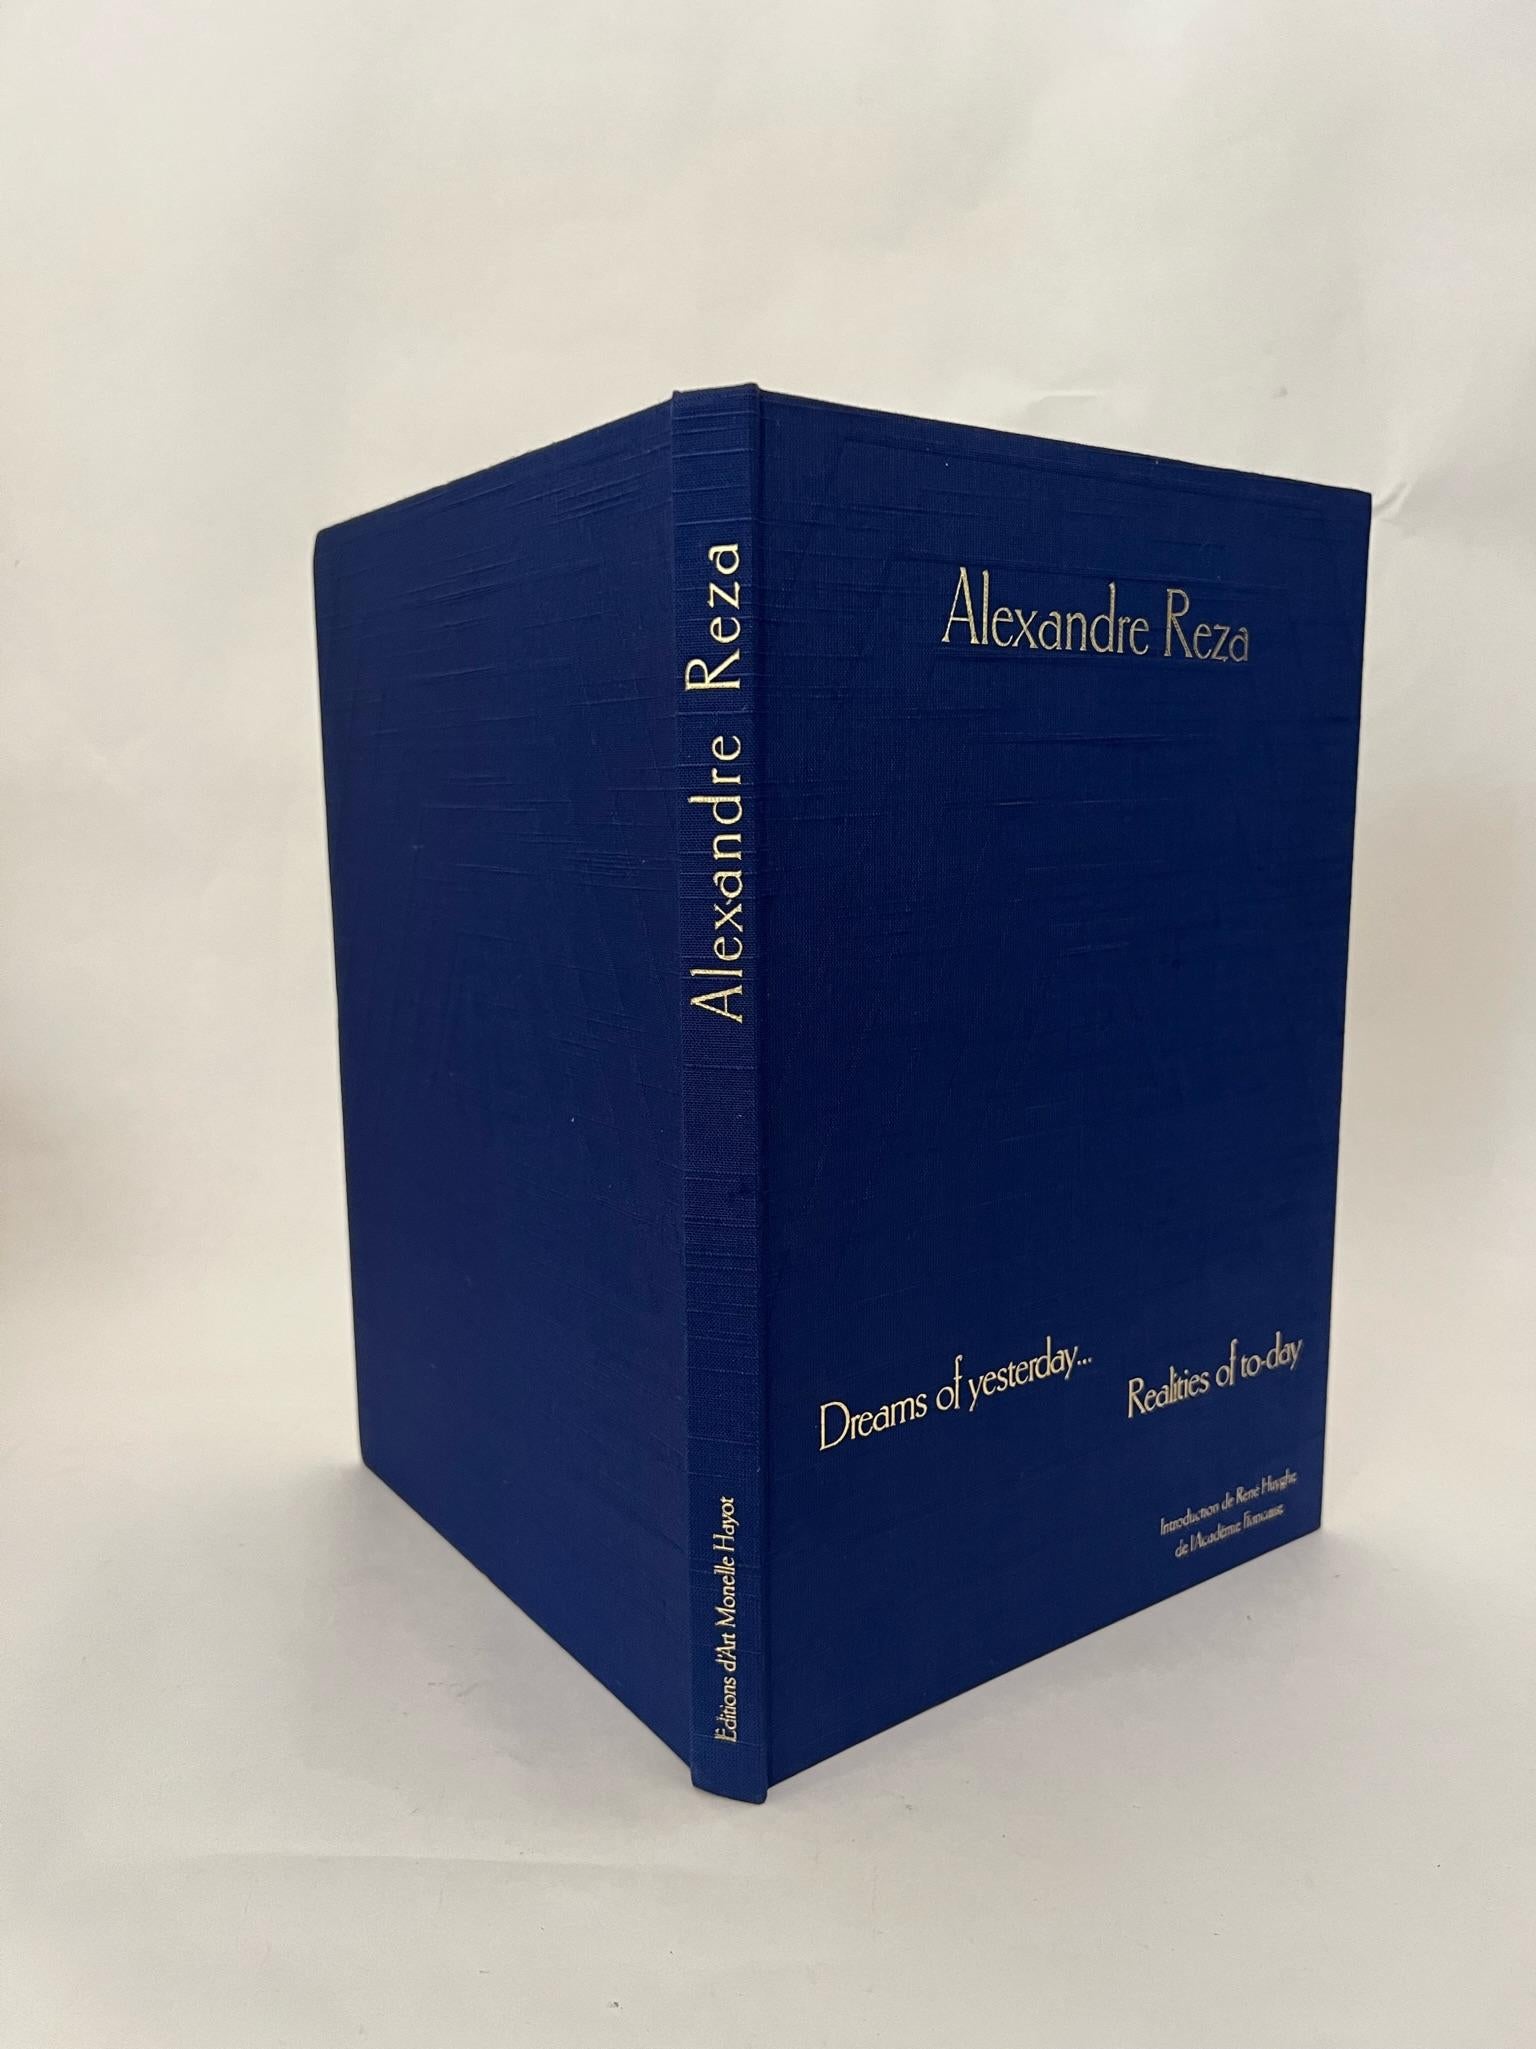 Alexandre Reza Dreams of Yesterday Realities of To-Day Book by Arlette Seta 1985 For Sale 8